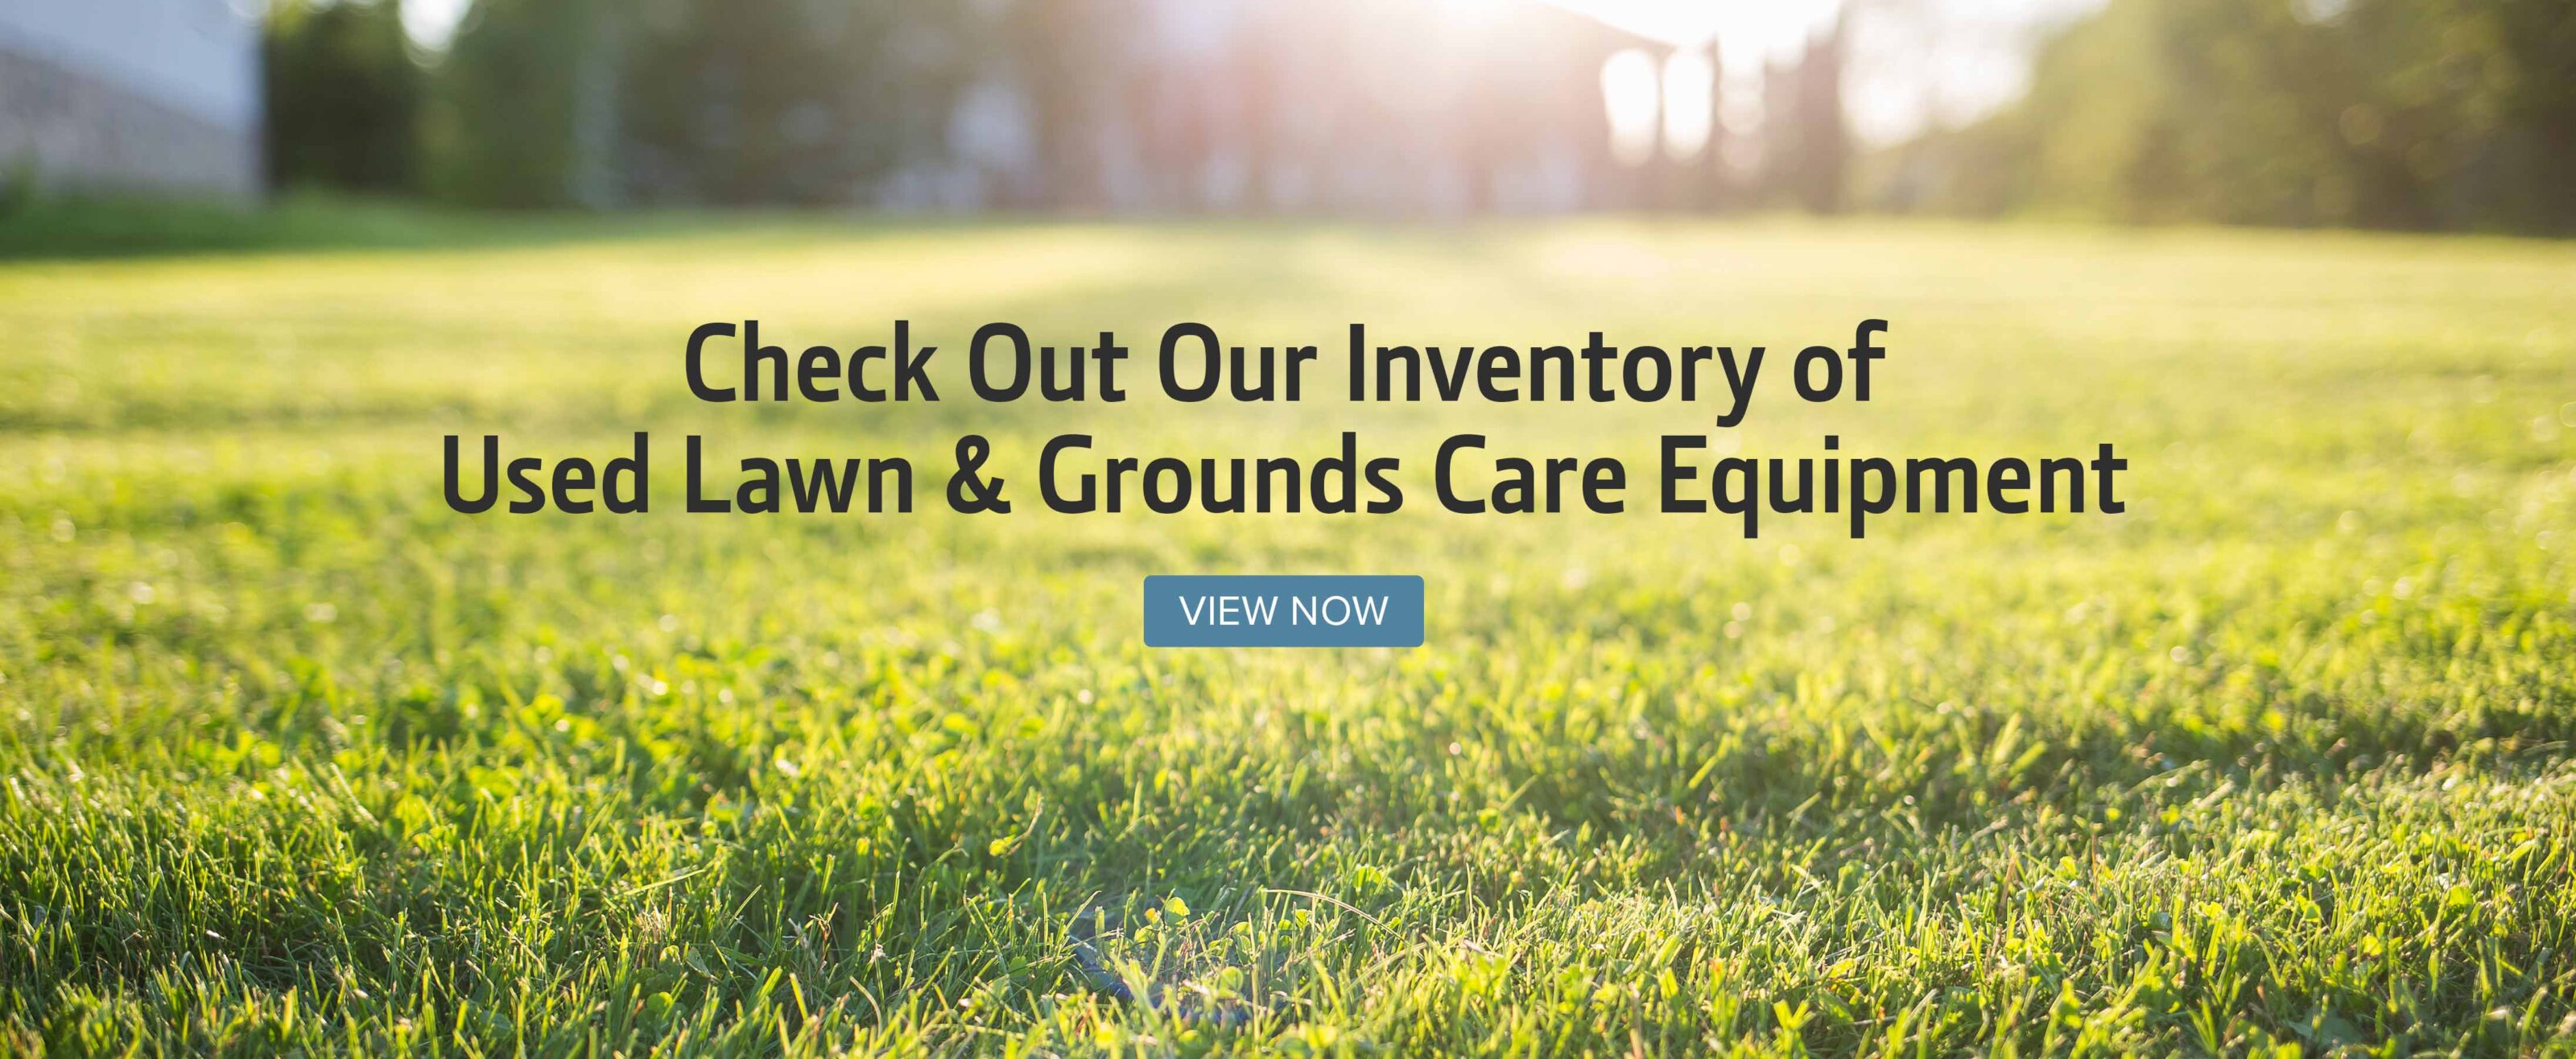 Check Out Our Inventory of Used Lawn&Grounds Care Equipment